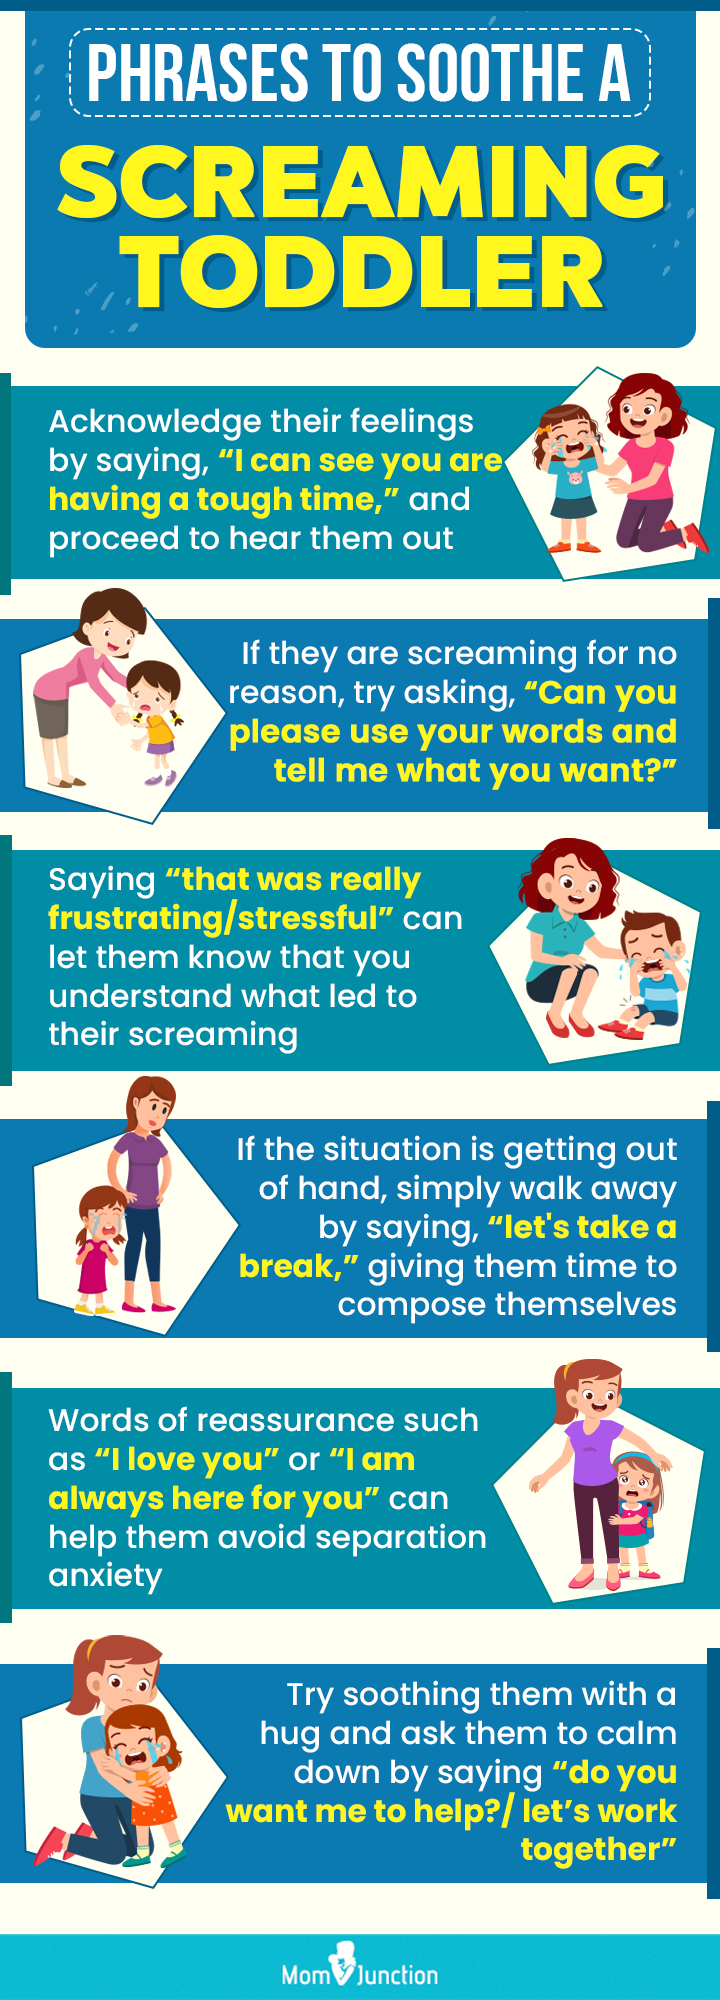 phrases to soothe a screaming toddler [infographic]